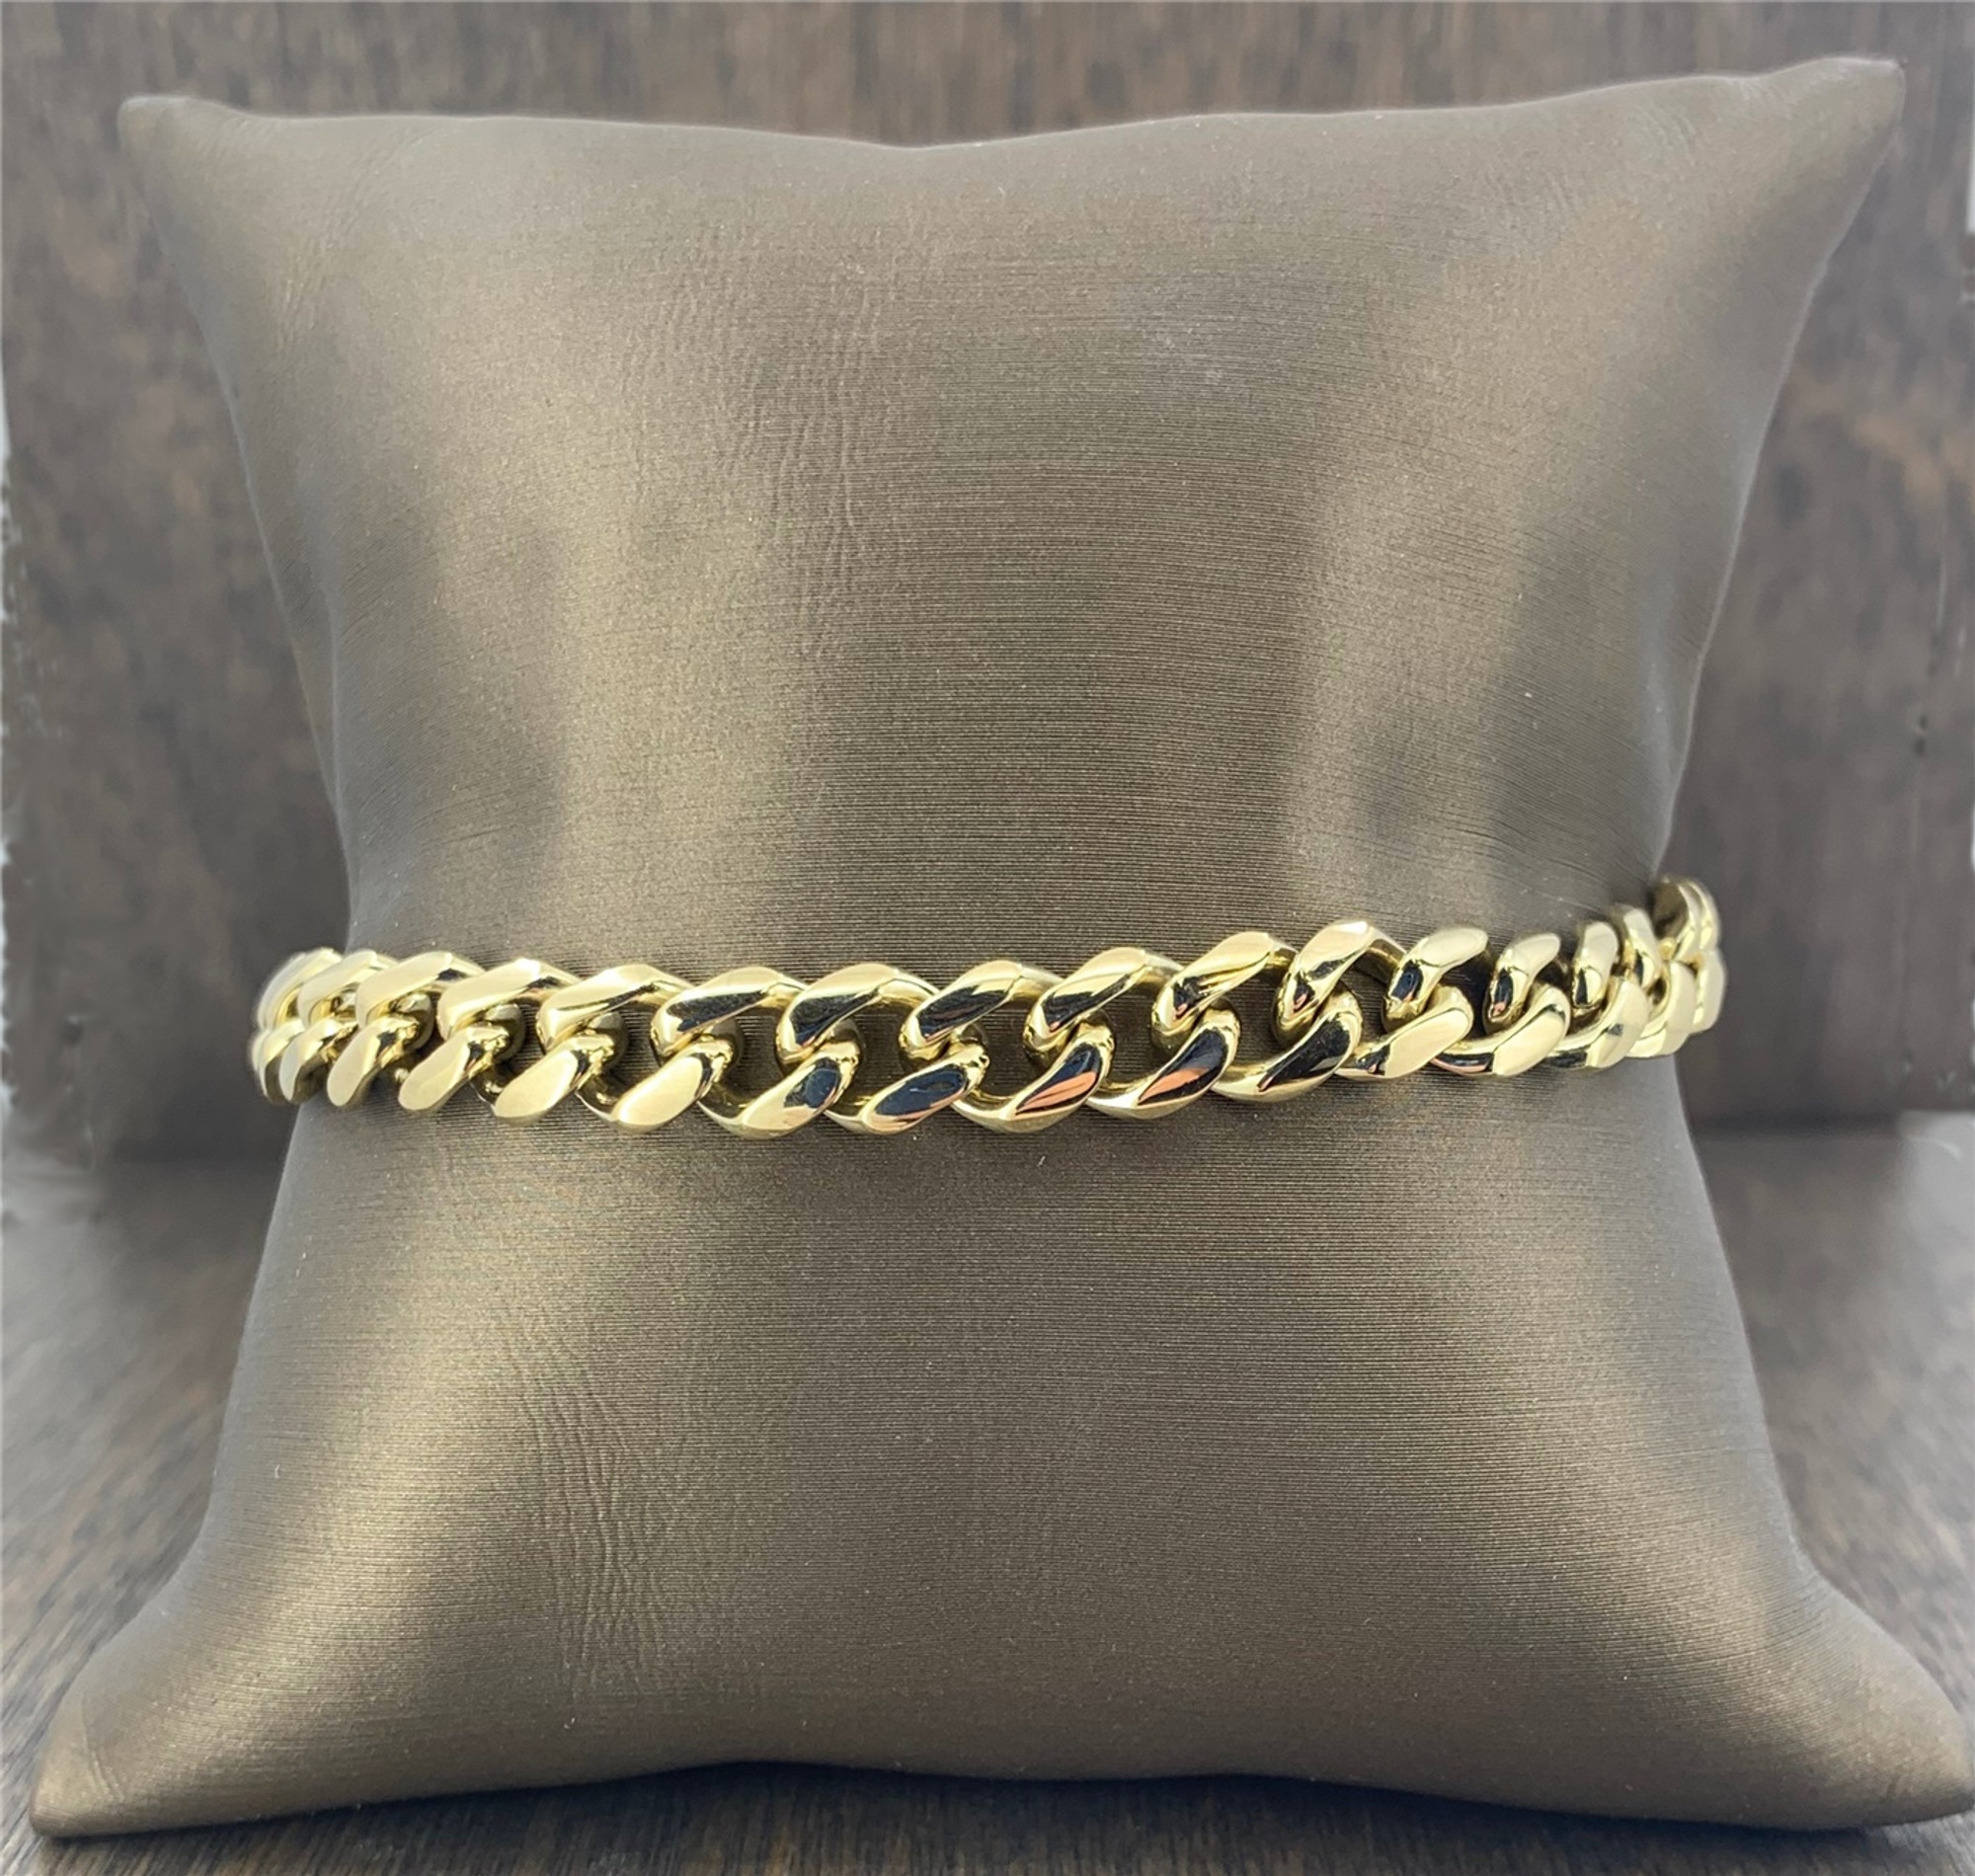 Buy 18k Gold Cuban Link Chain Bracelet Gold Curb Chain Bracelet Gift Miami Cuban  Bracelet Cuban Chain Bracelet for Women Gold Bracelet Gold Online in India  - Etsy